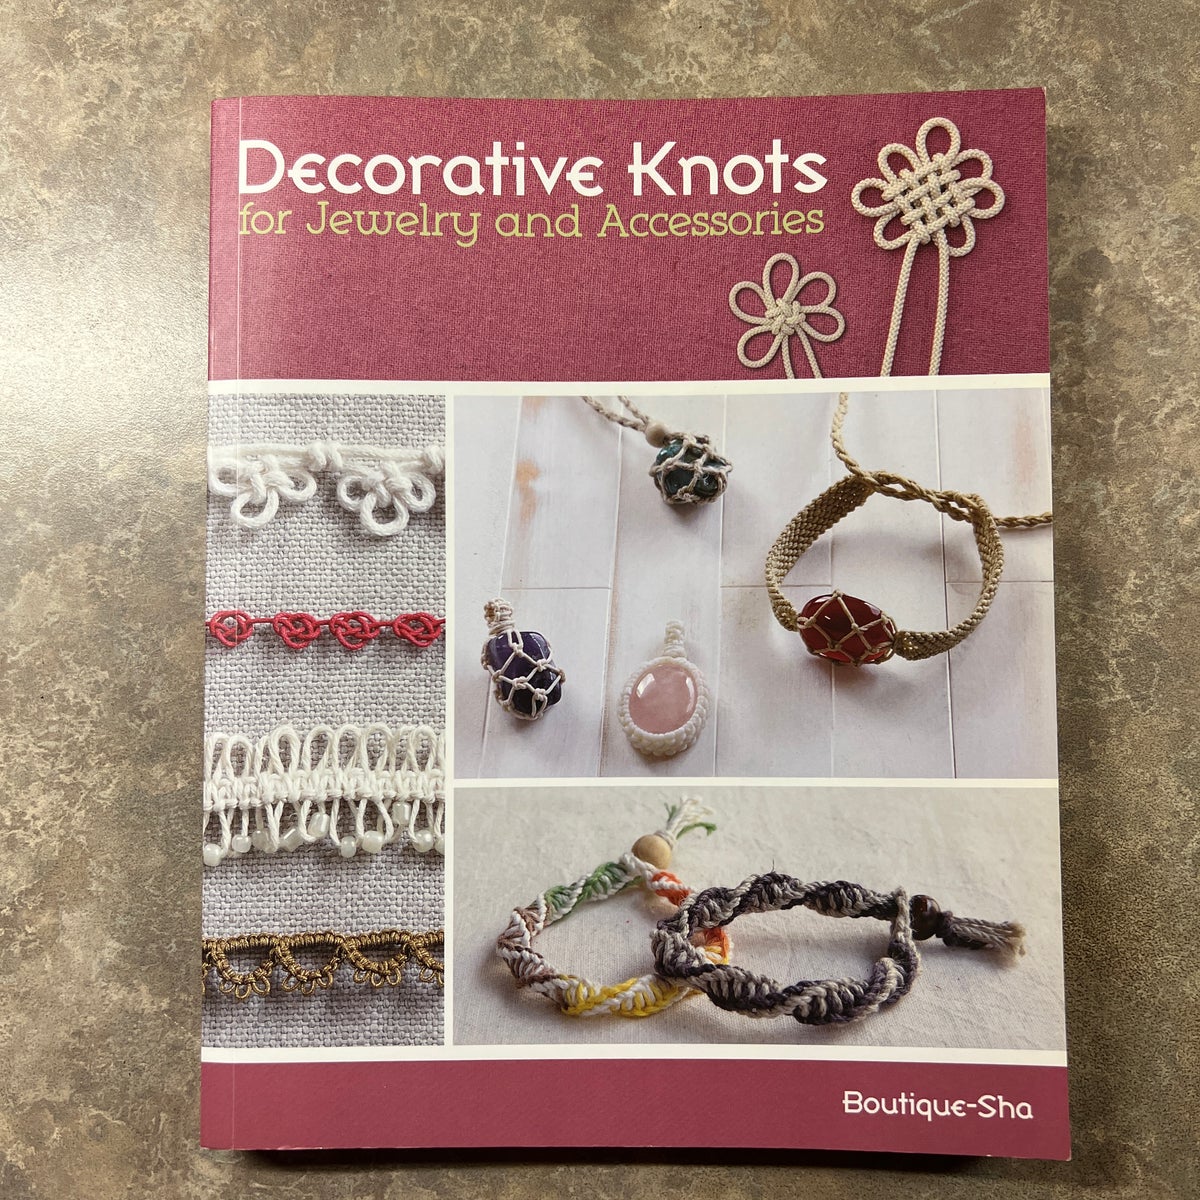 Decorative Knots for Jewelry and Accessories by Boutique-Sha Staff